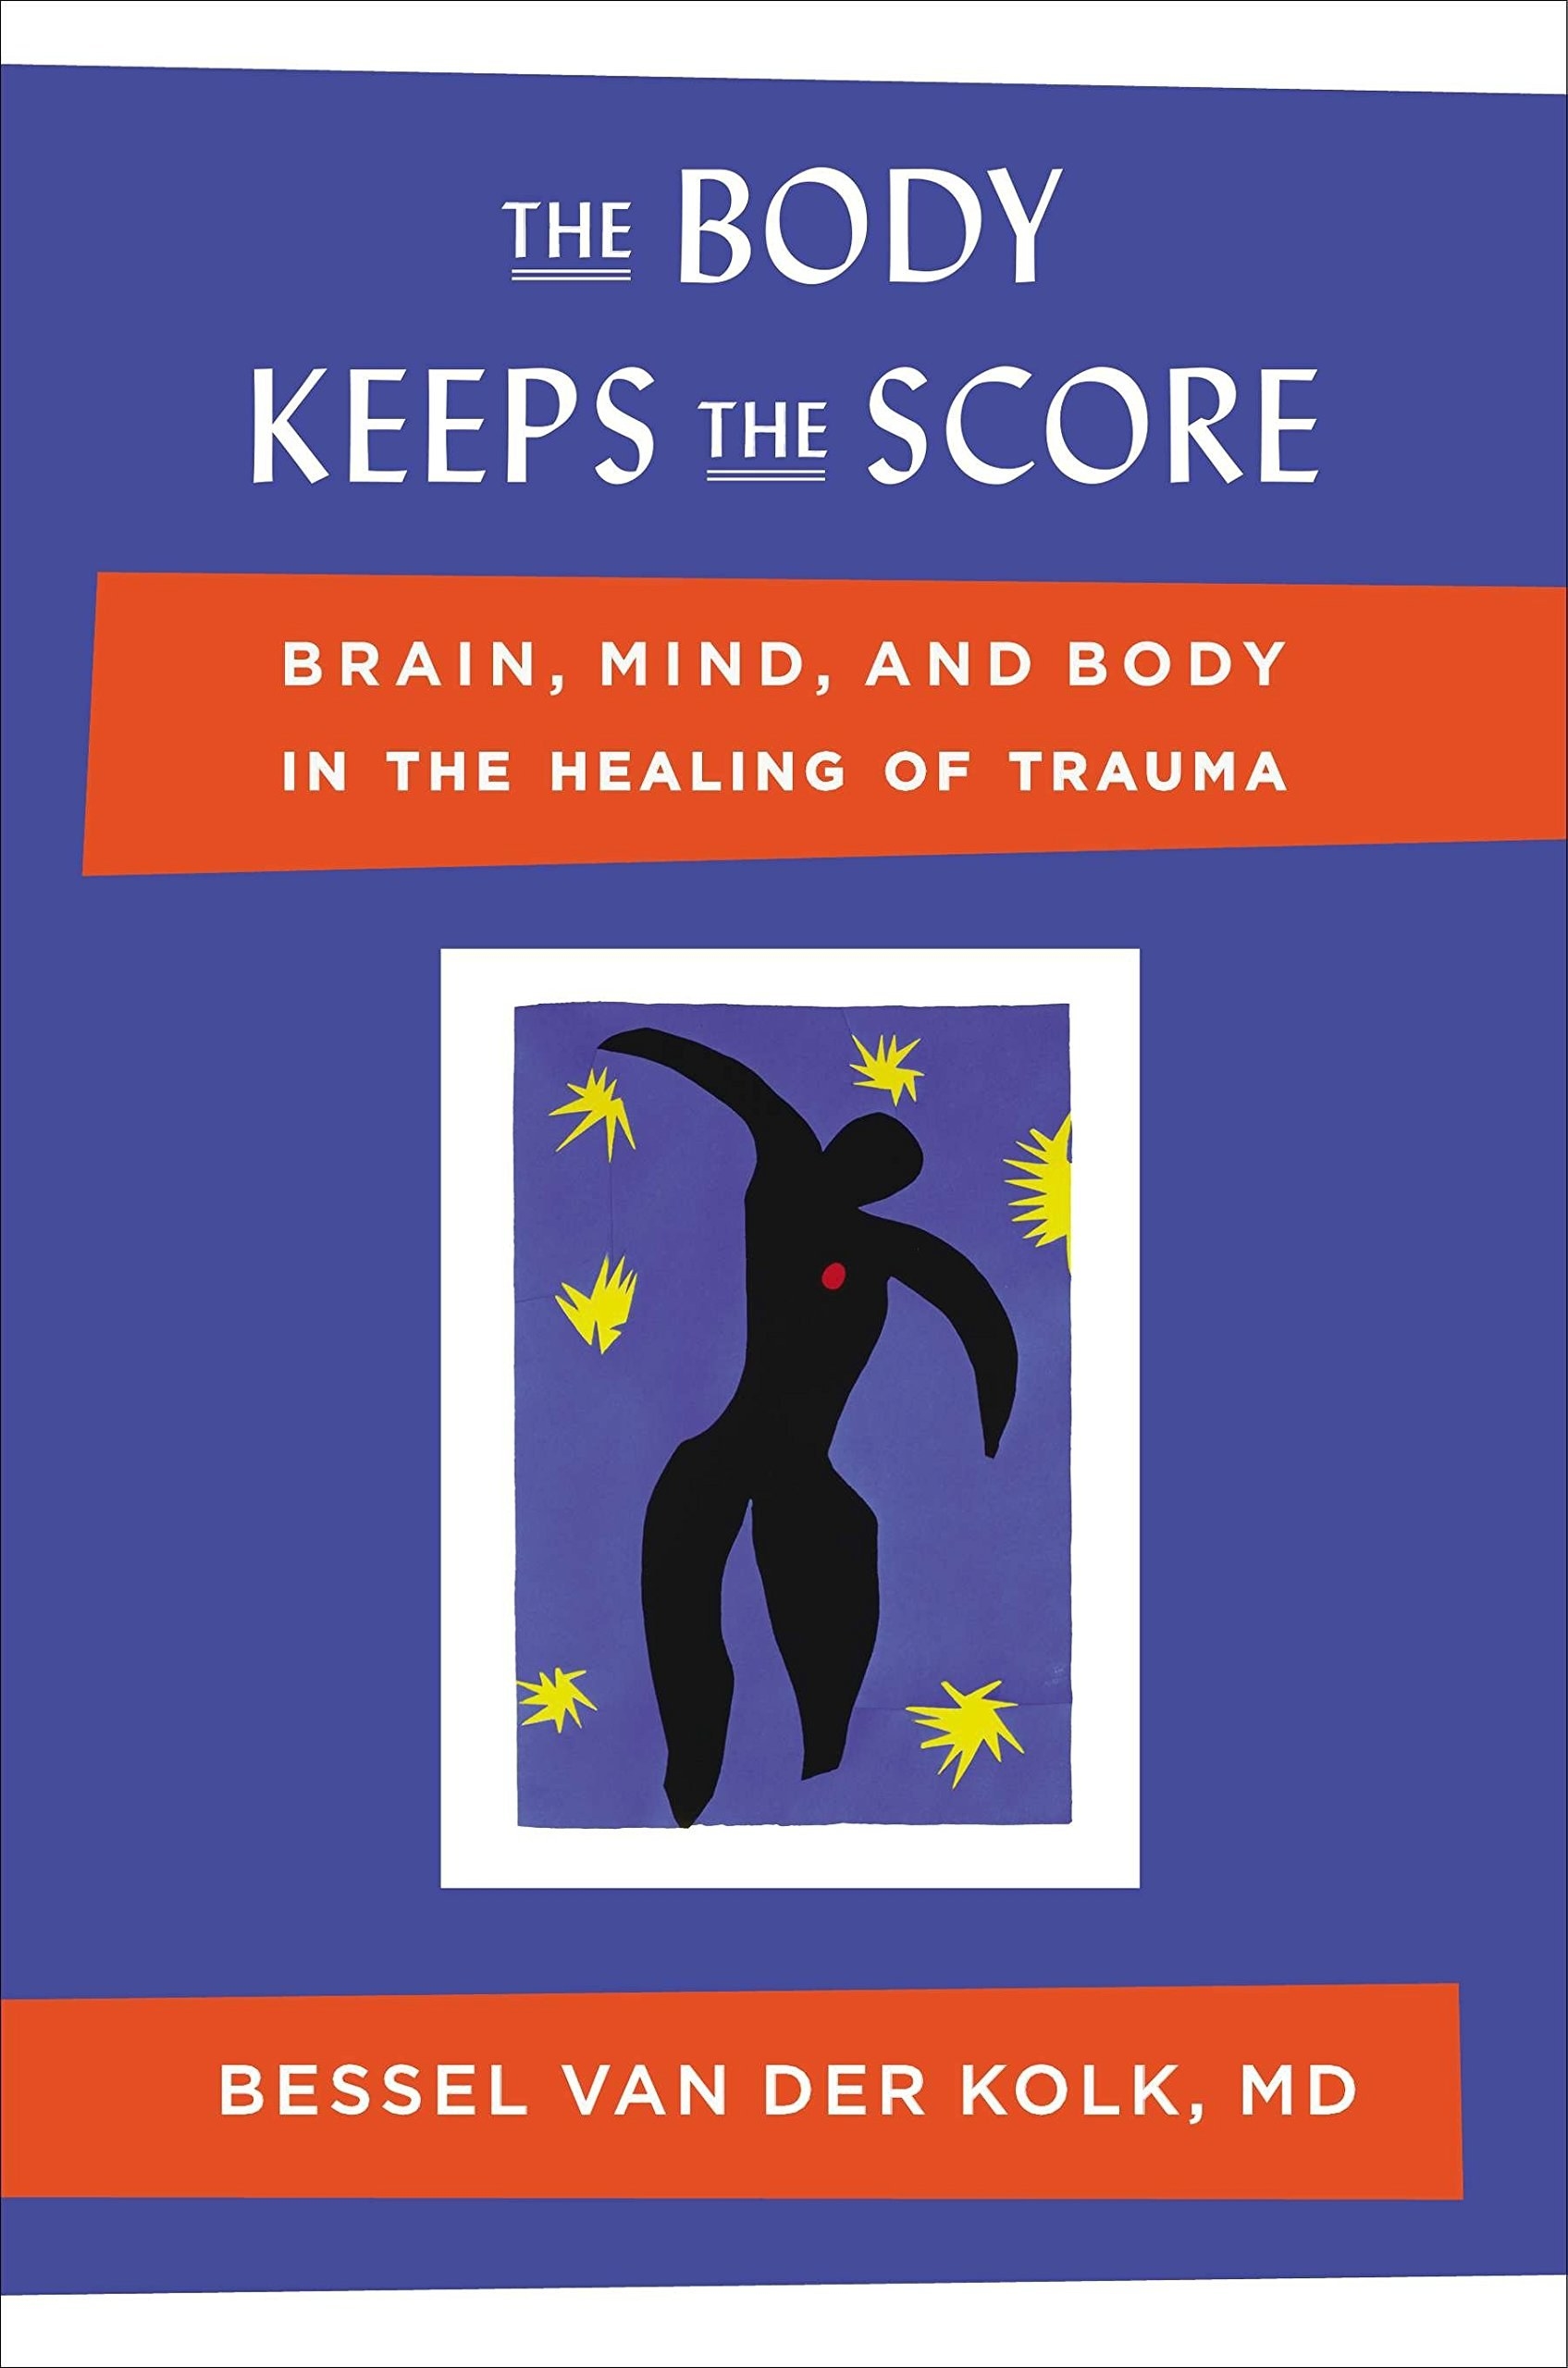 Book cover of &quot;the body keeps score&quot;